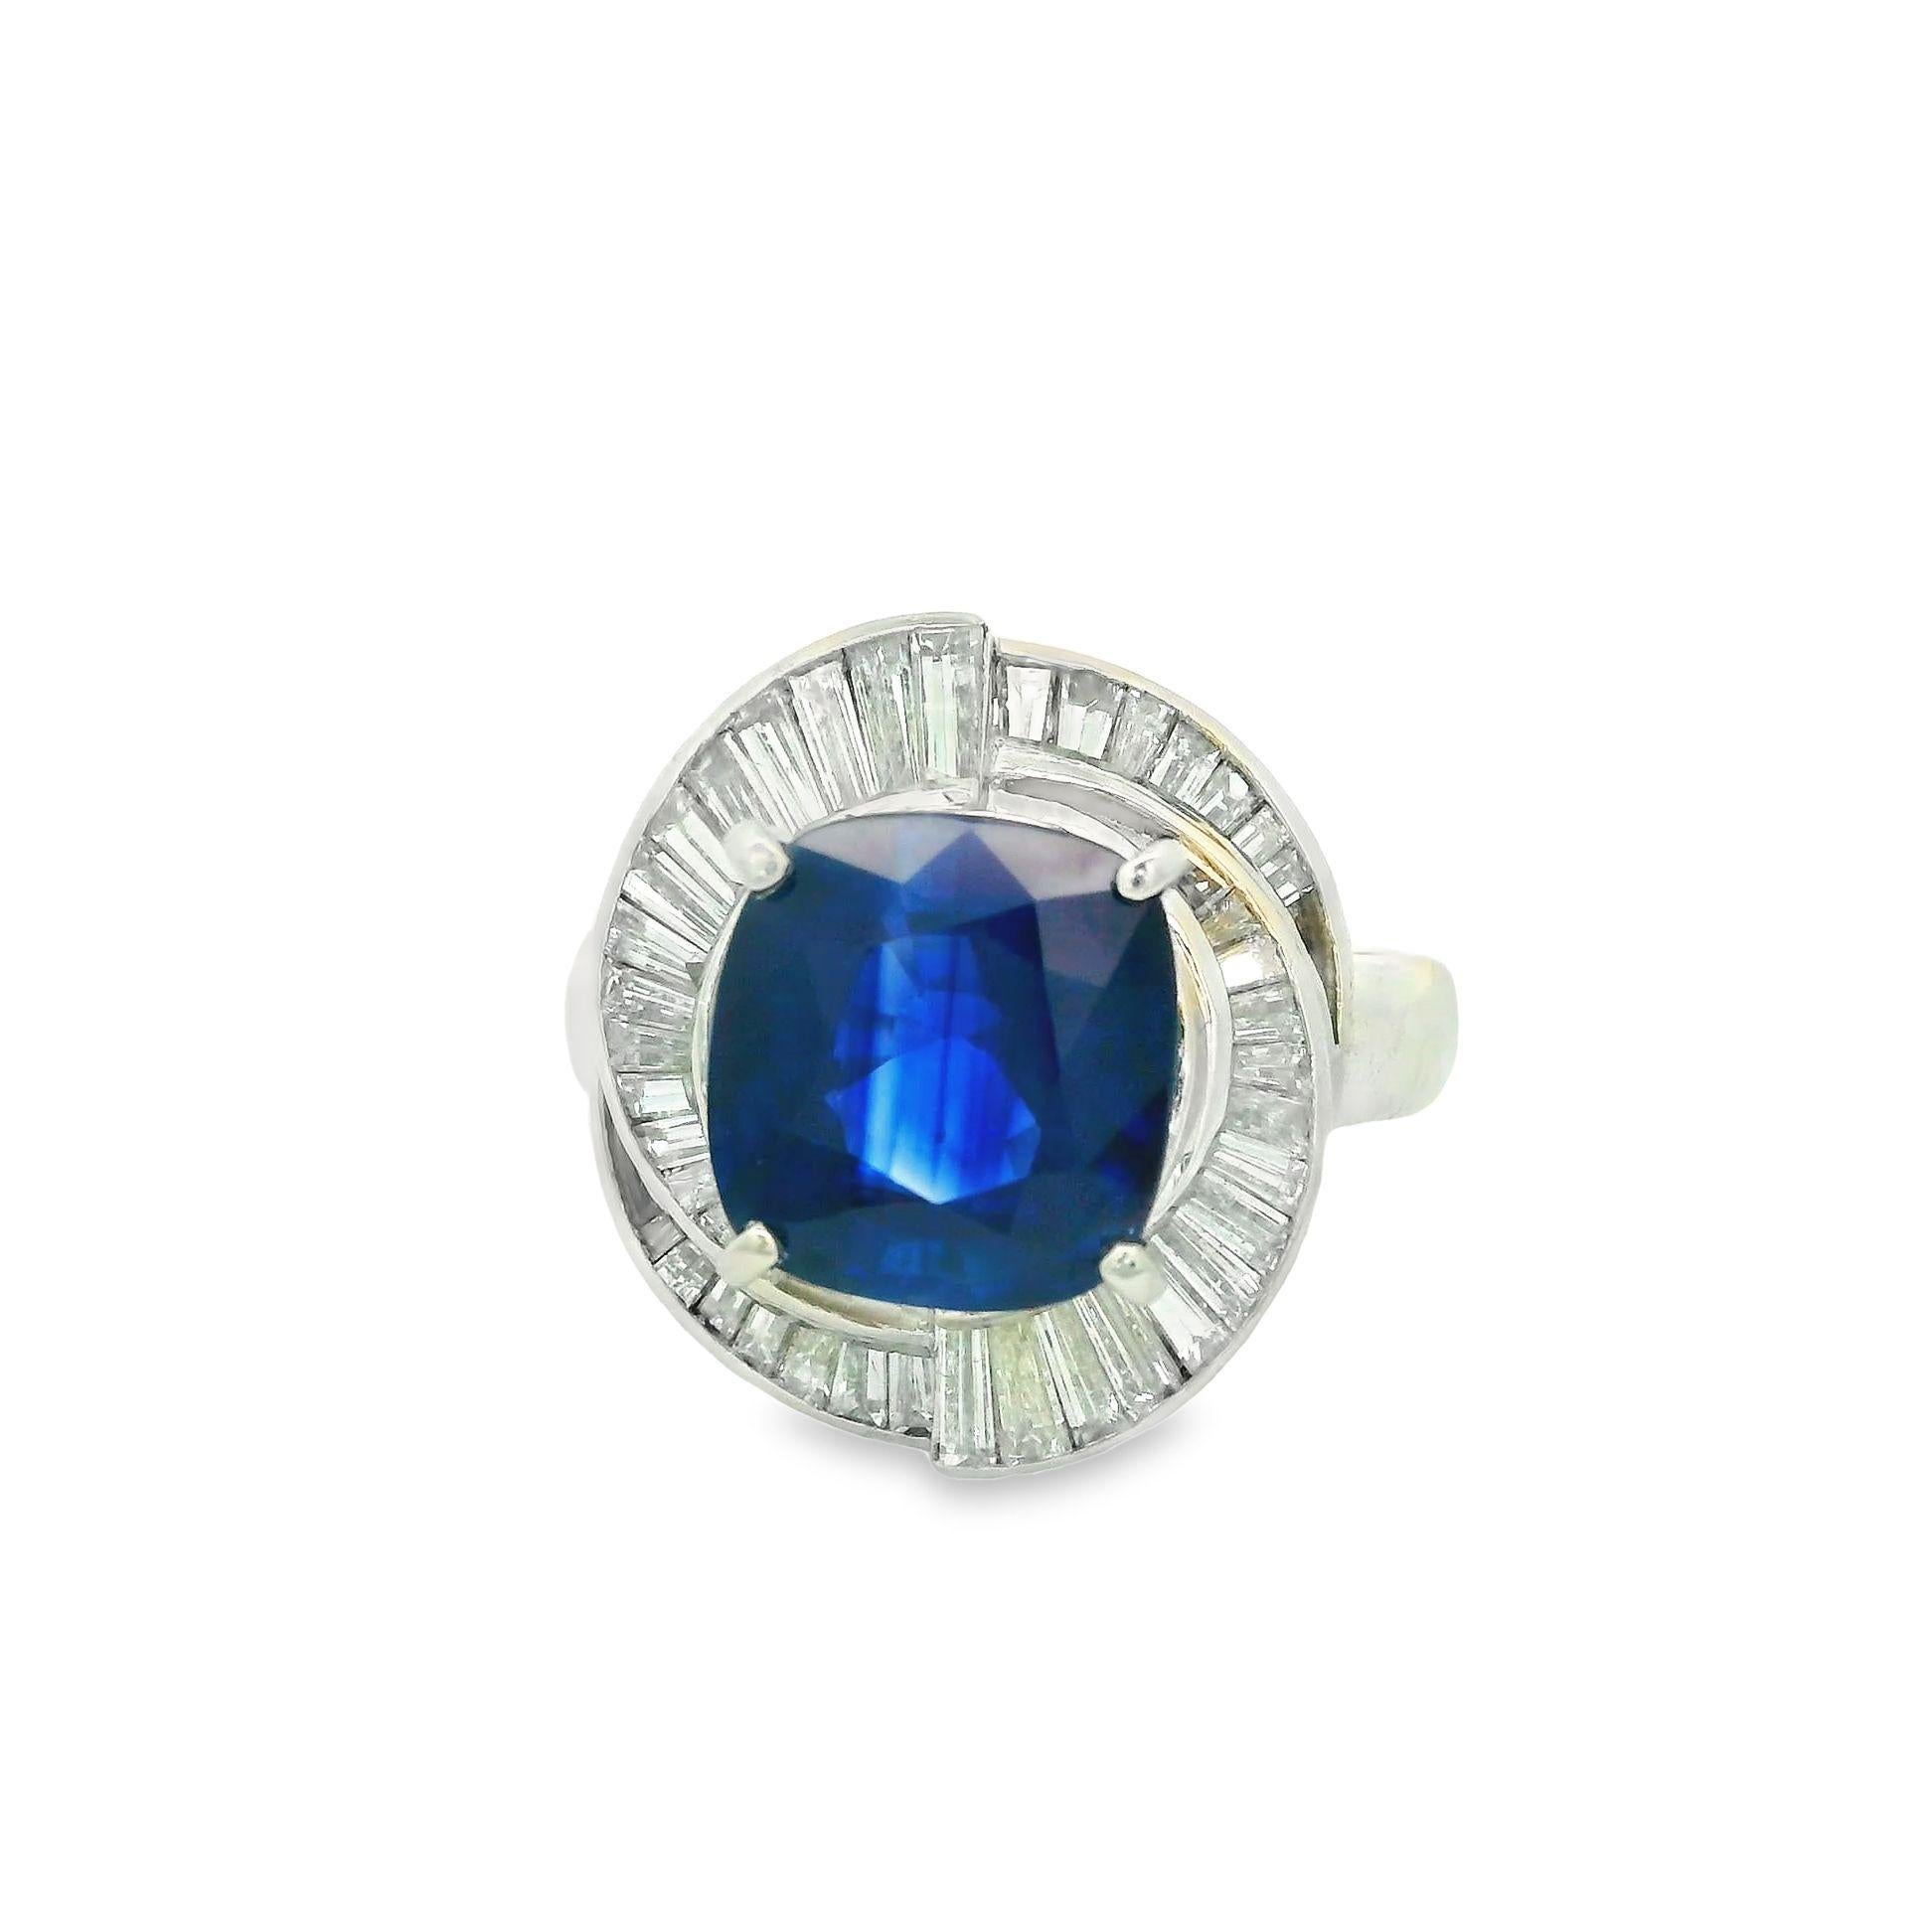 A superb richly colored sapphire takes center stage of this platinum diamond ring. The sapphire weighs just under 4 carats, (3.98), and has a rich vivid blue color known in the trade as “royal blue” for the finest of sapphires. The GRS lab in